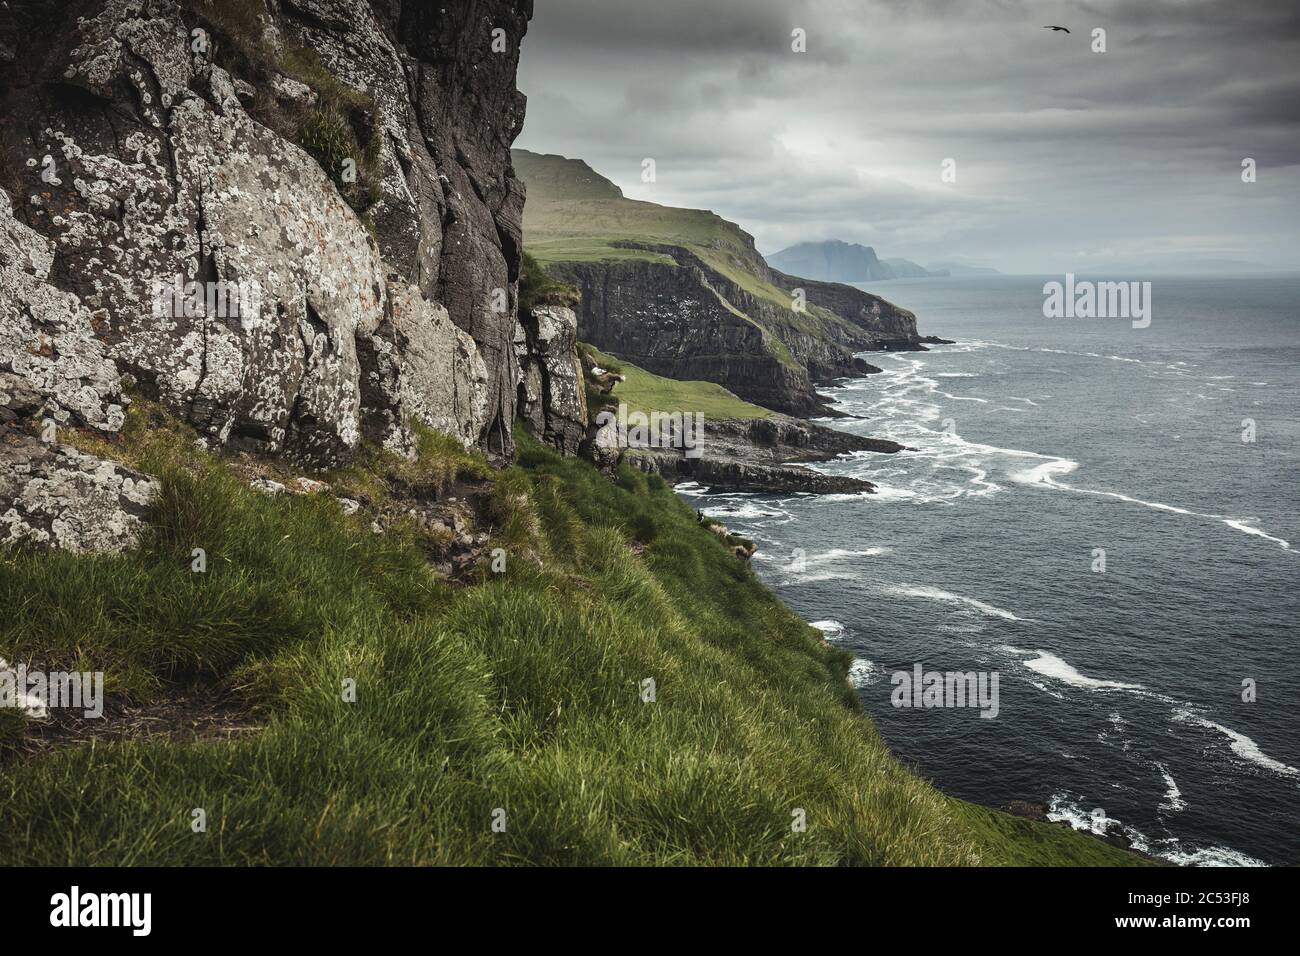 view of the coast of the island of Mykines in the Faroe Islands. Stock Photo